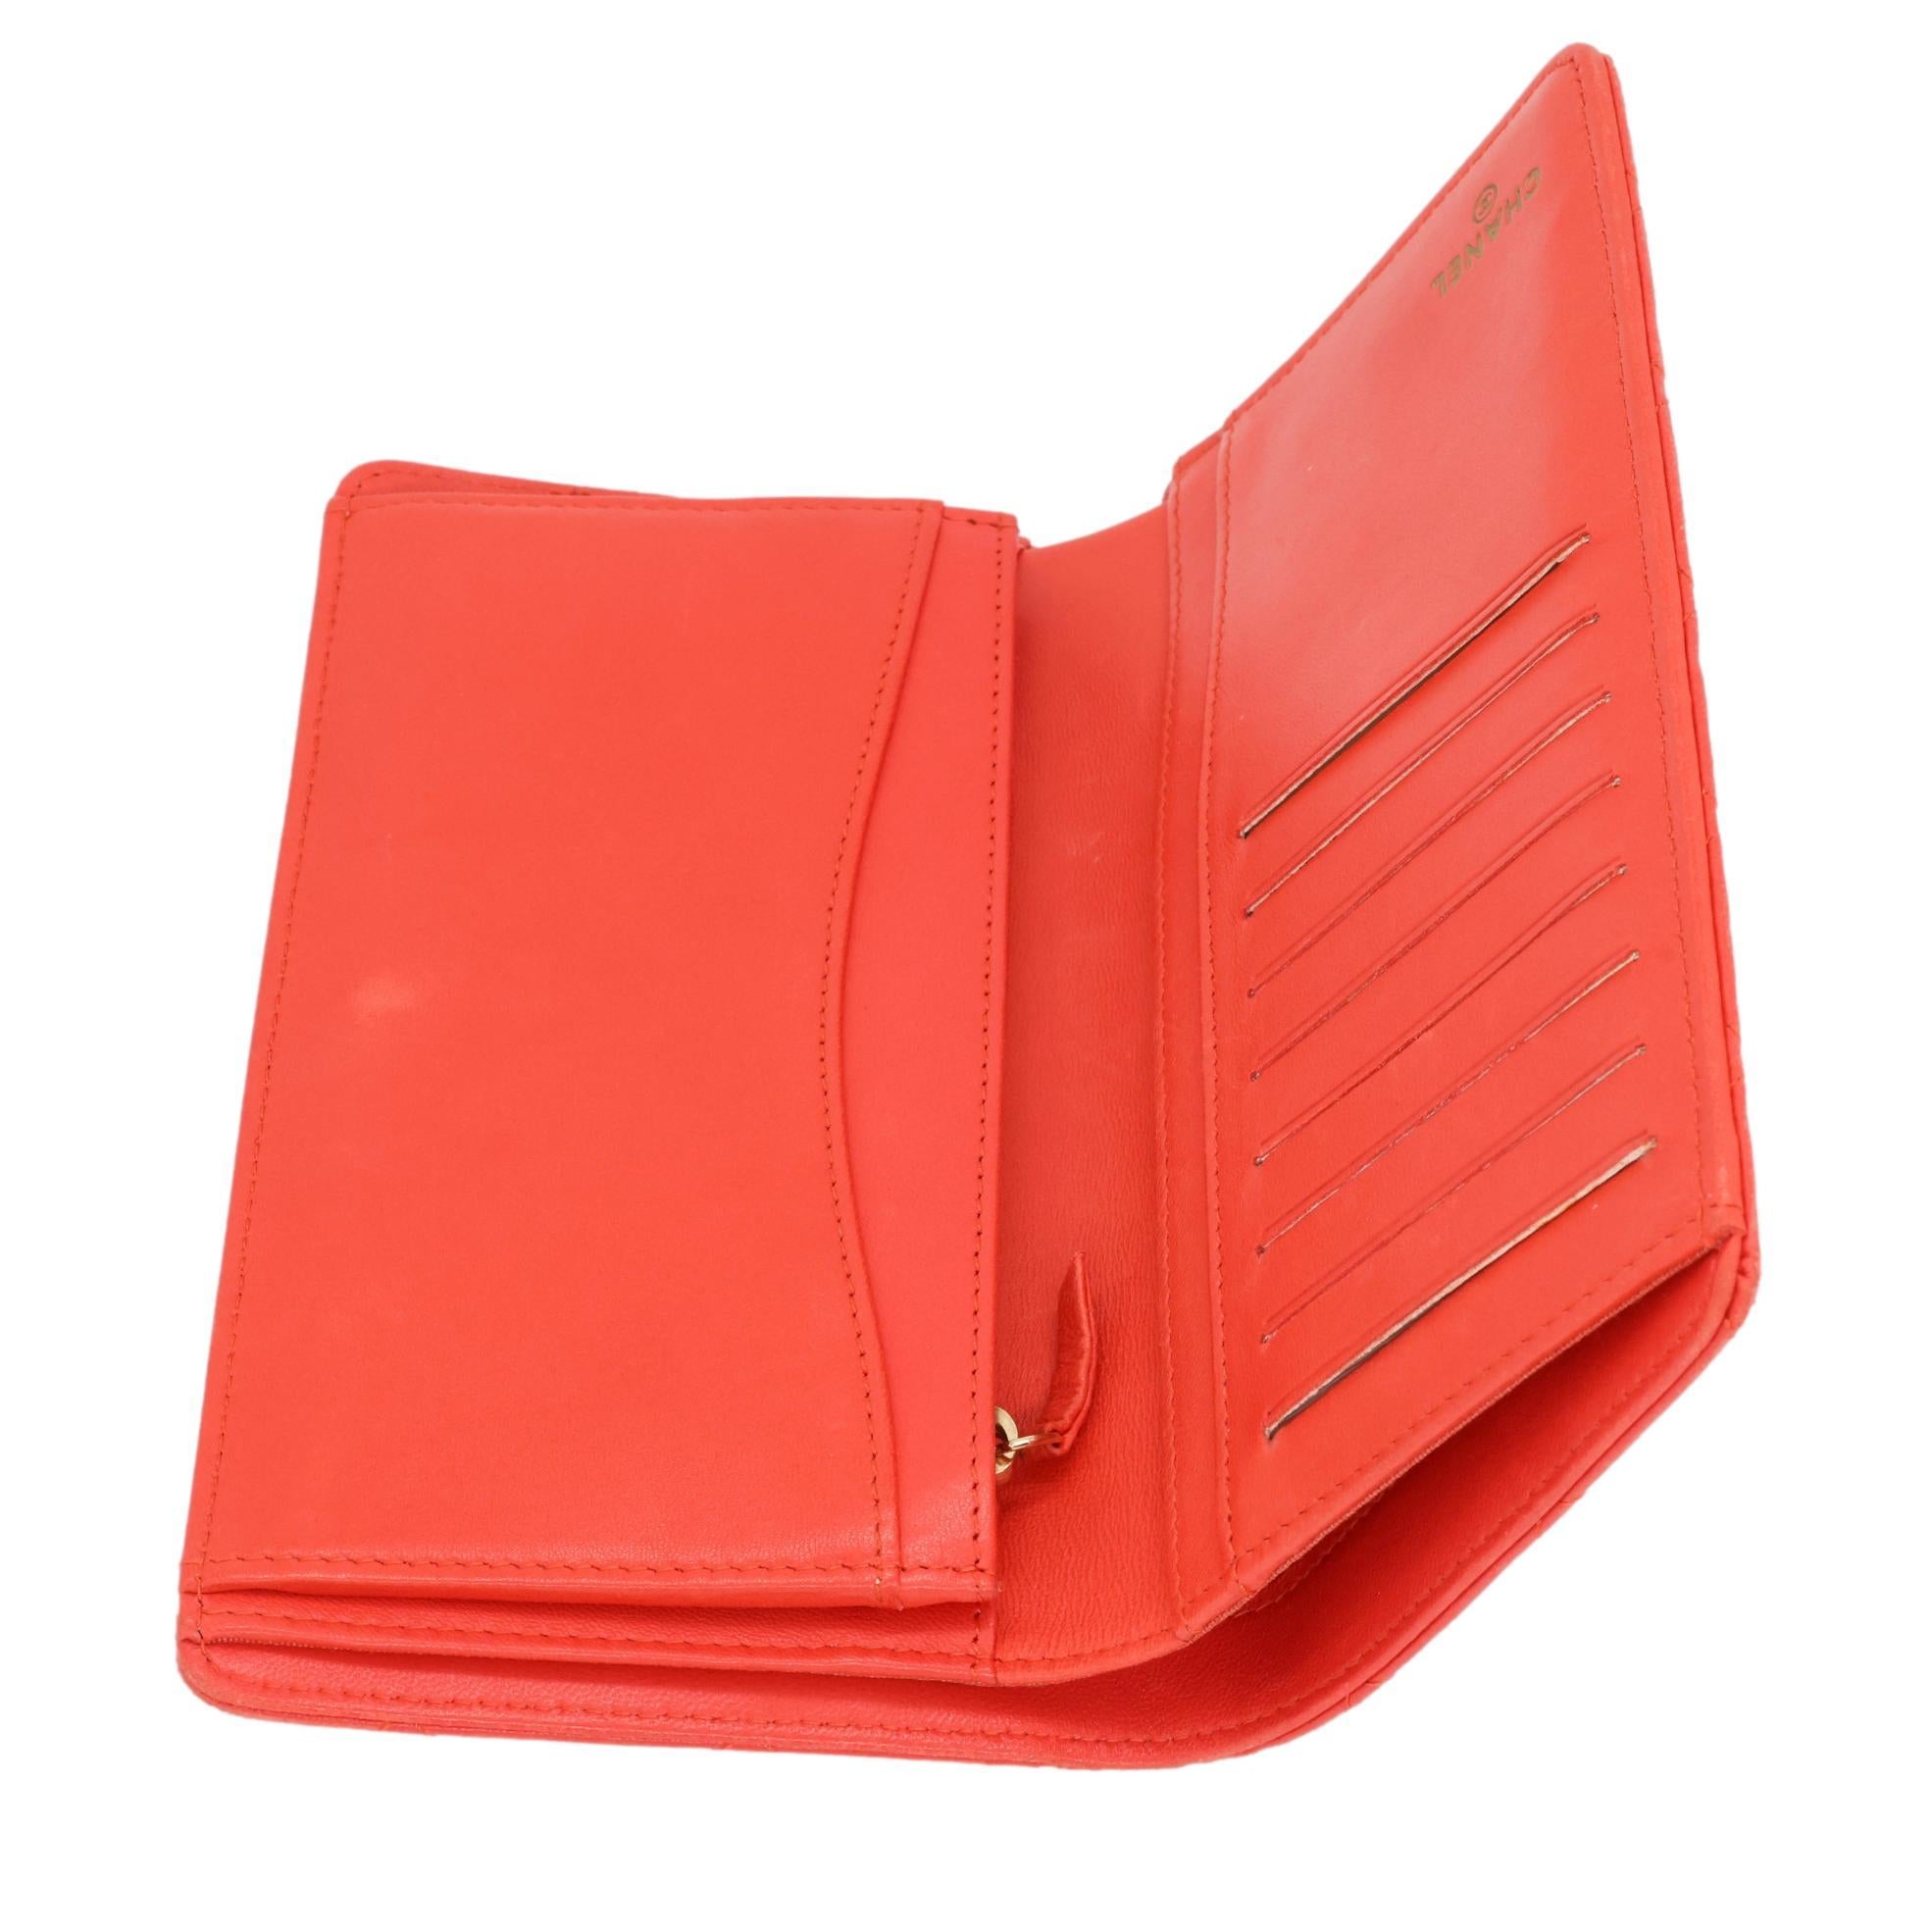 Chanel Quilted Coral Lambskin Leather Yen Continental Wallet, 2009 - 2010. 4